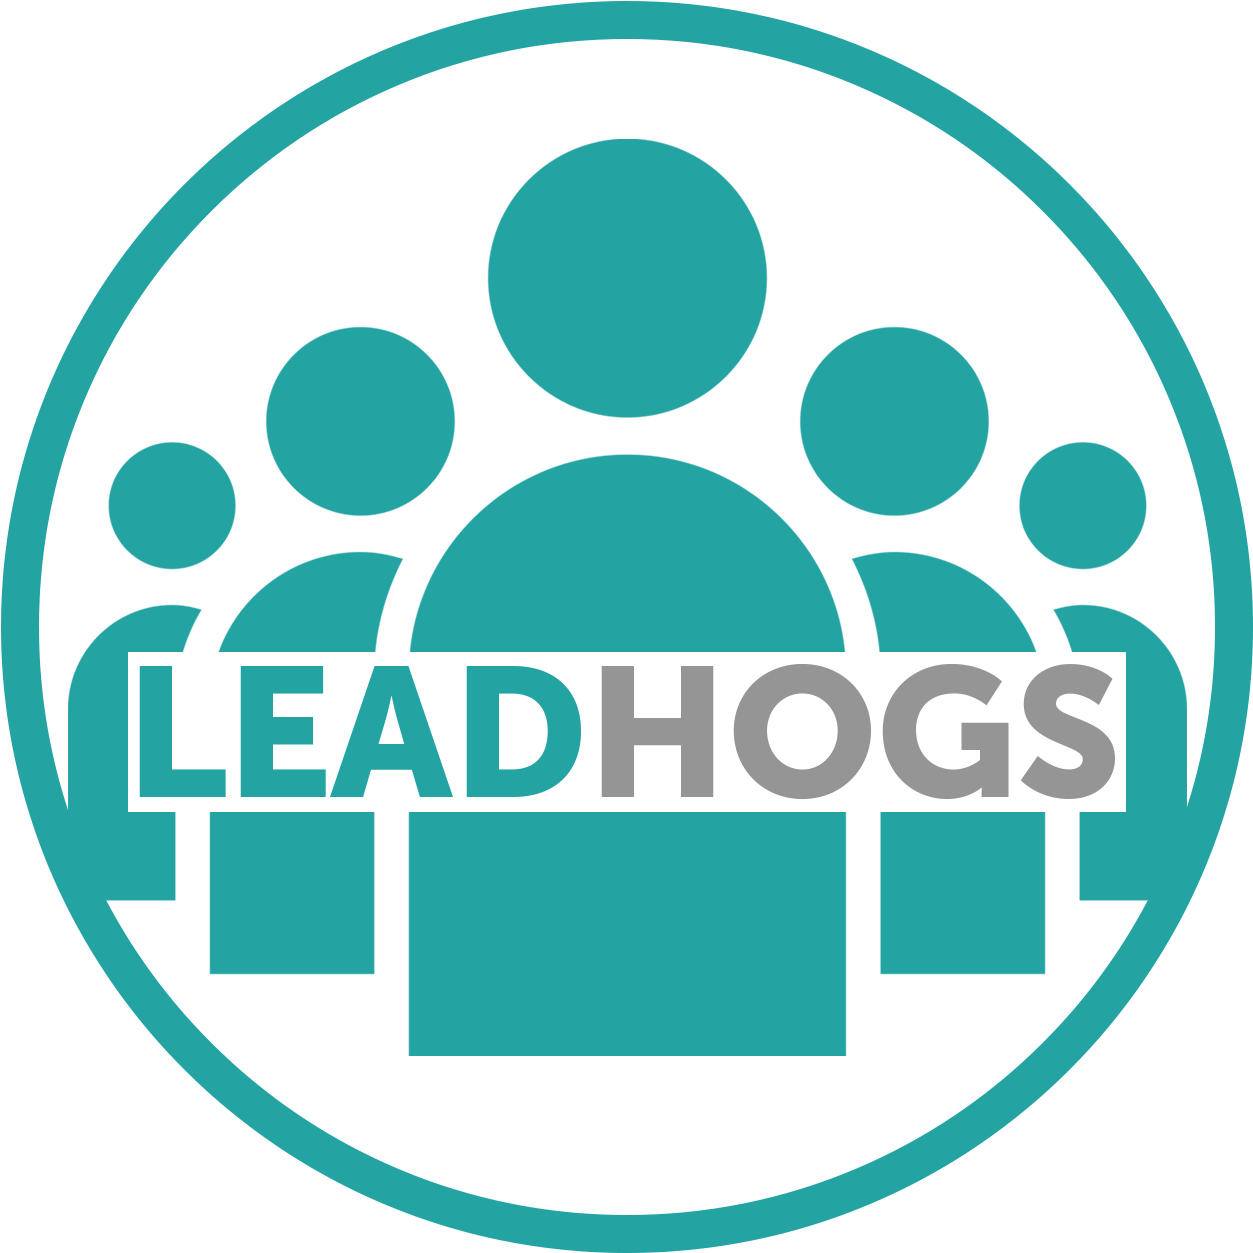 Thank You For Your Interest In The Lead Hog Program - Gpoint Skate Shop (1289x1287)